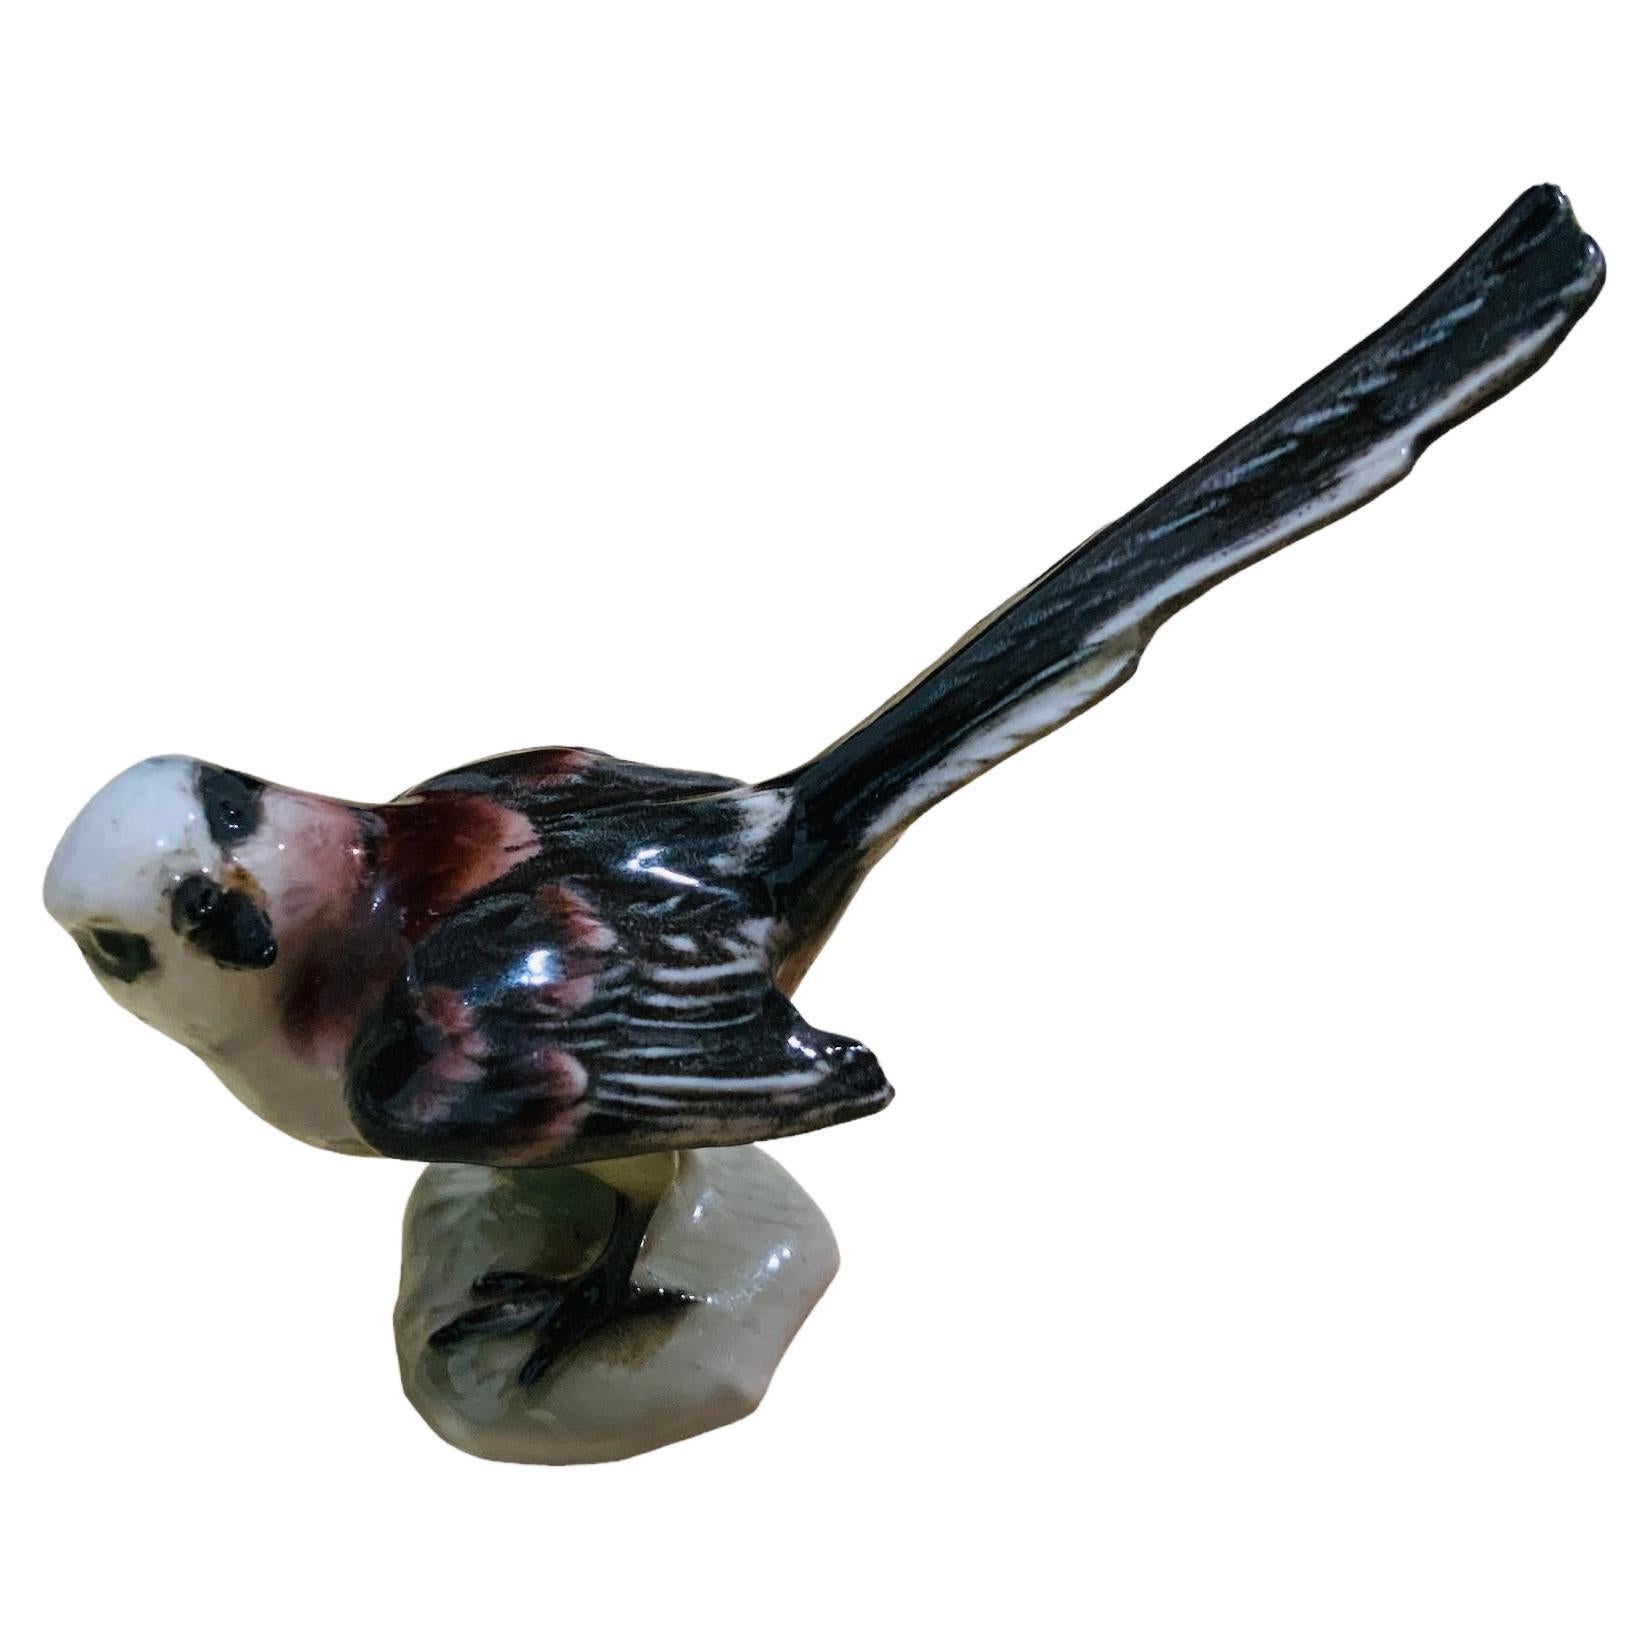 Goebel Porcelain Hand Painted Bird Figurine of a Long Tailed Titmouse